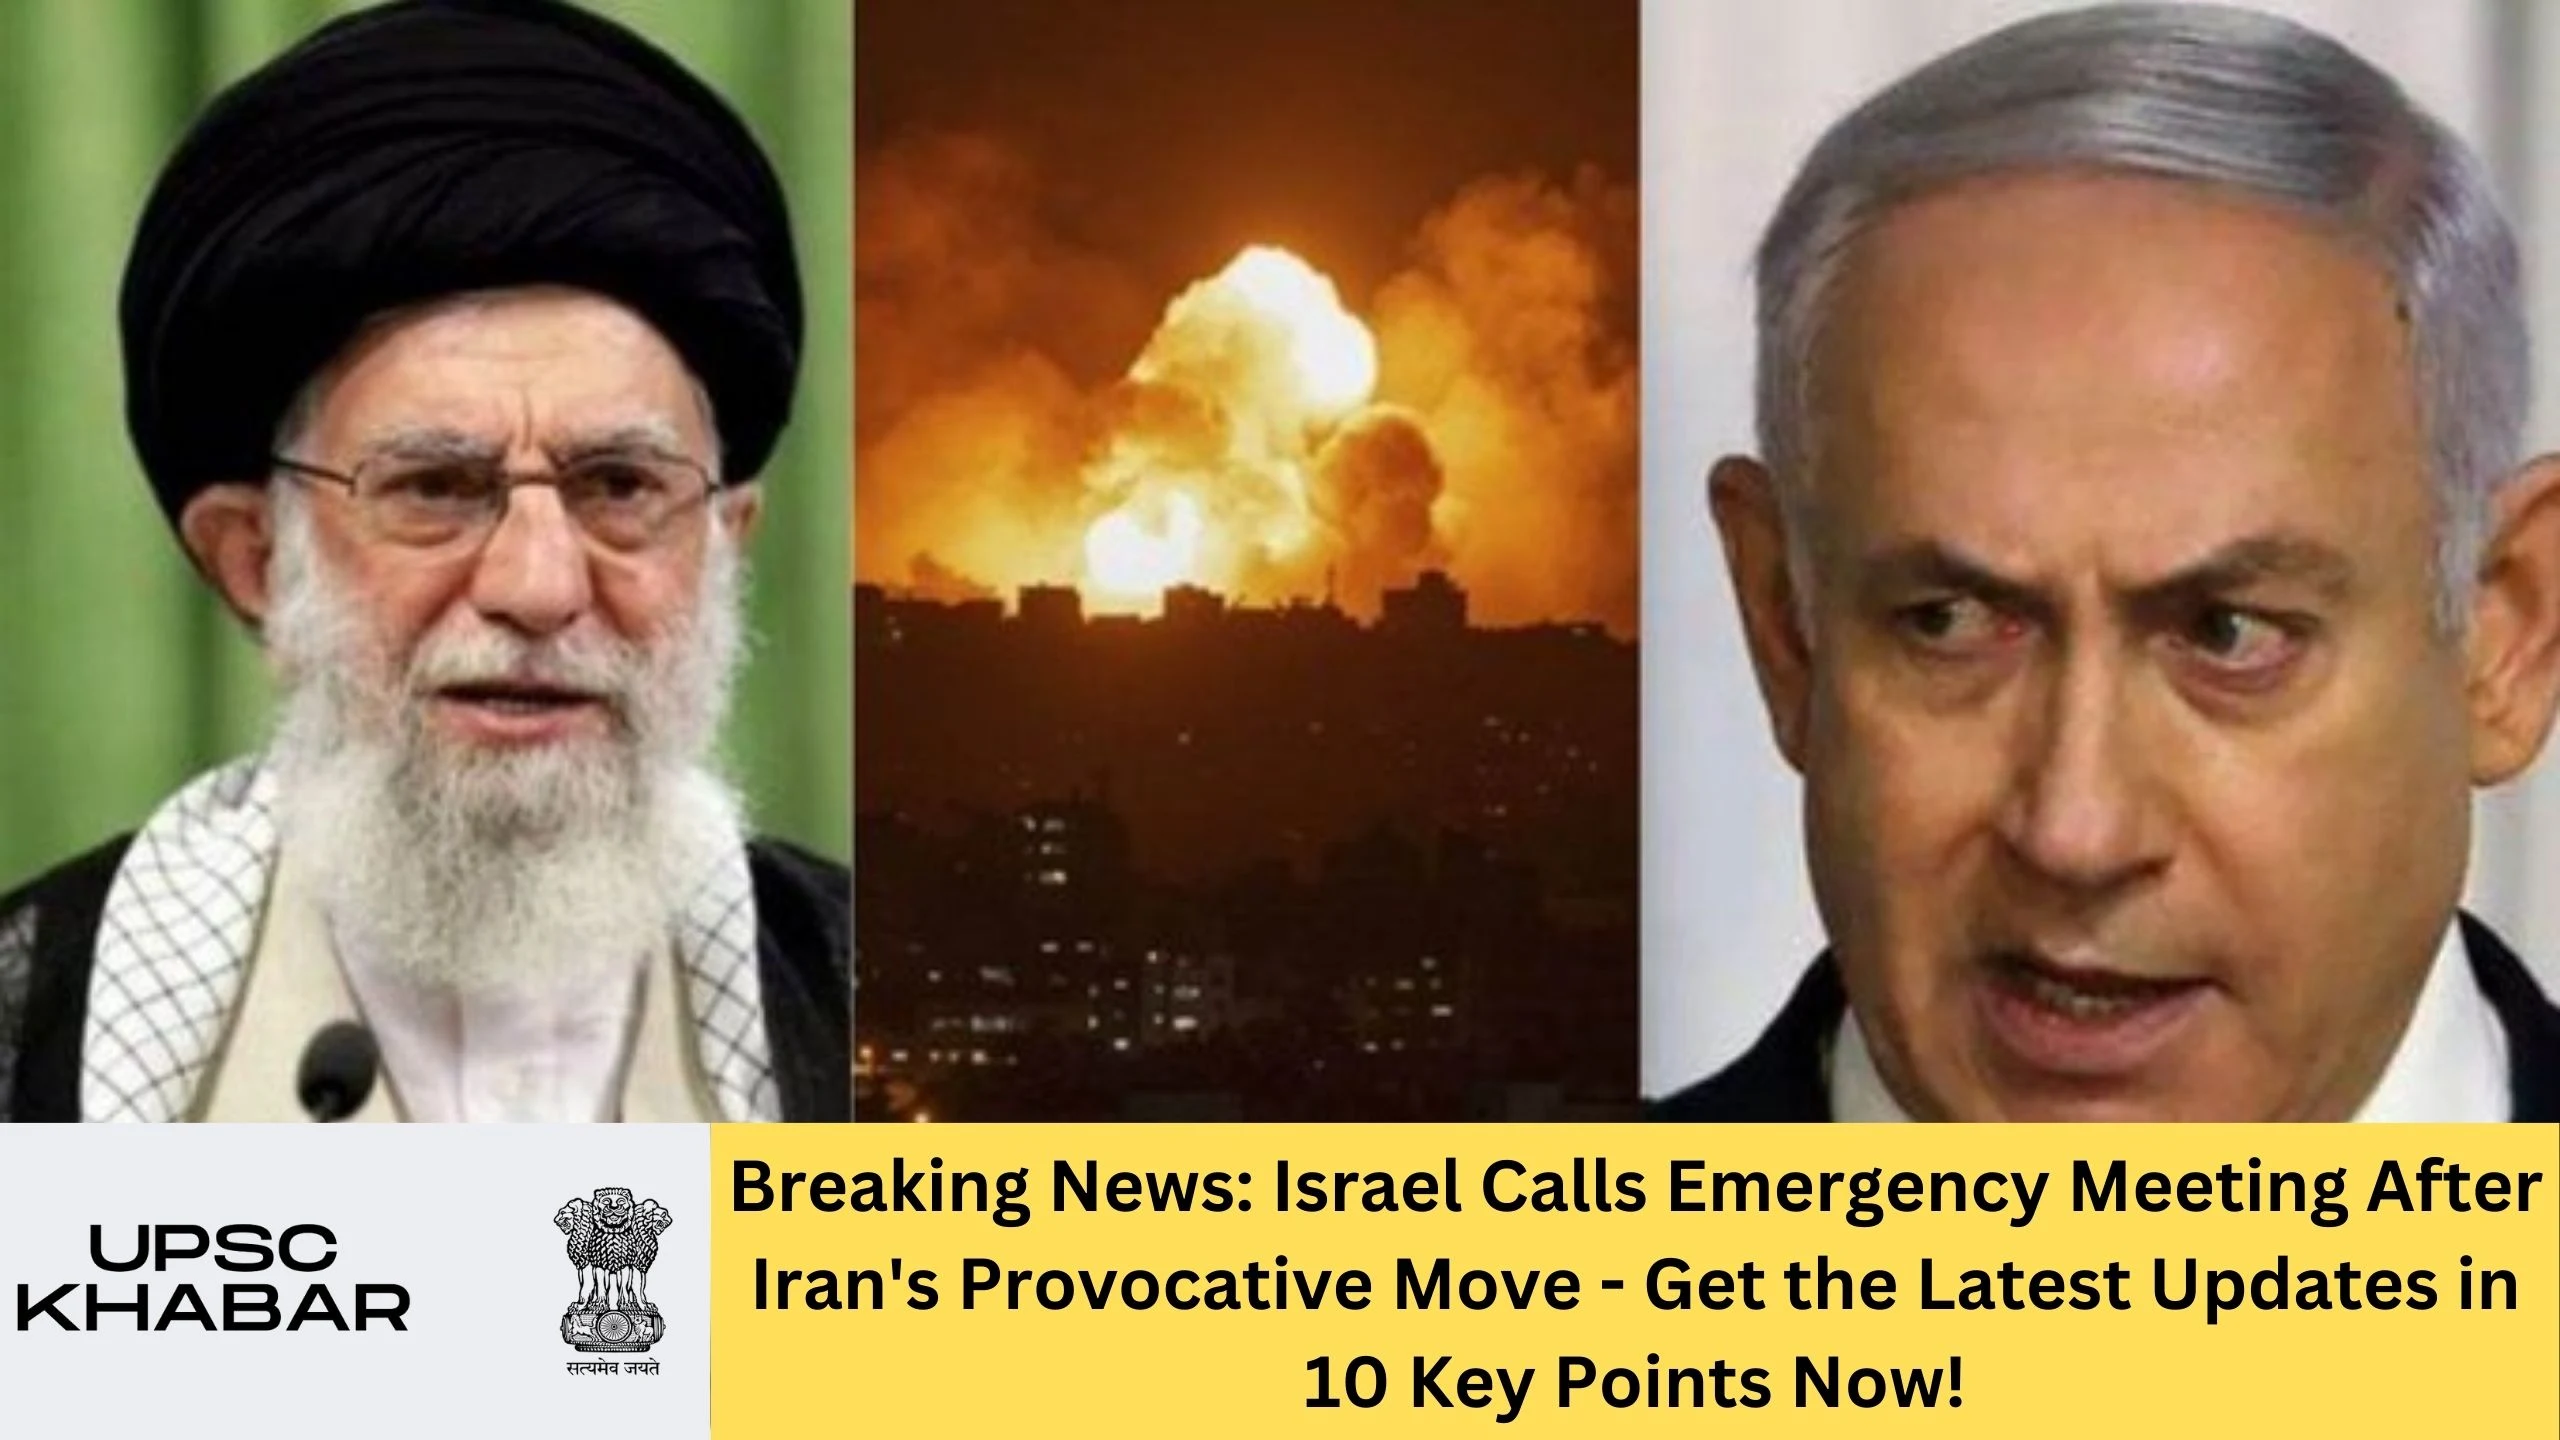 Breaking News: Israel Calls Emergency Meeting After Iran's Provocative Move - Get the Latest Updates in 10 Key Points Now!